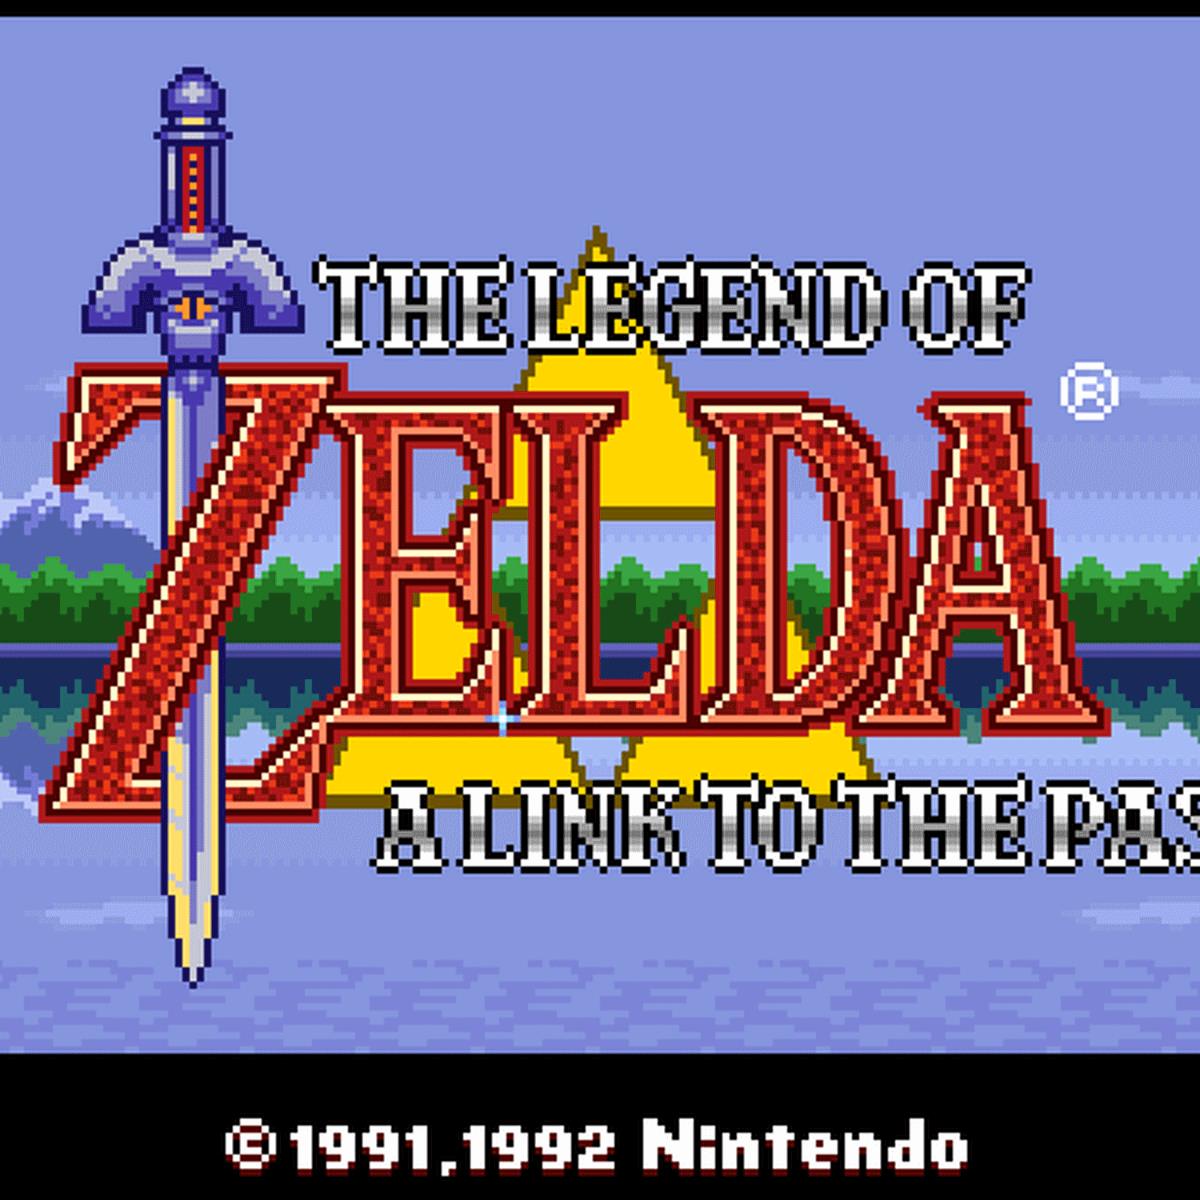 Native The Legend of Zelda: Ocarina of Time PC Port Receives First